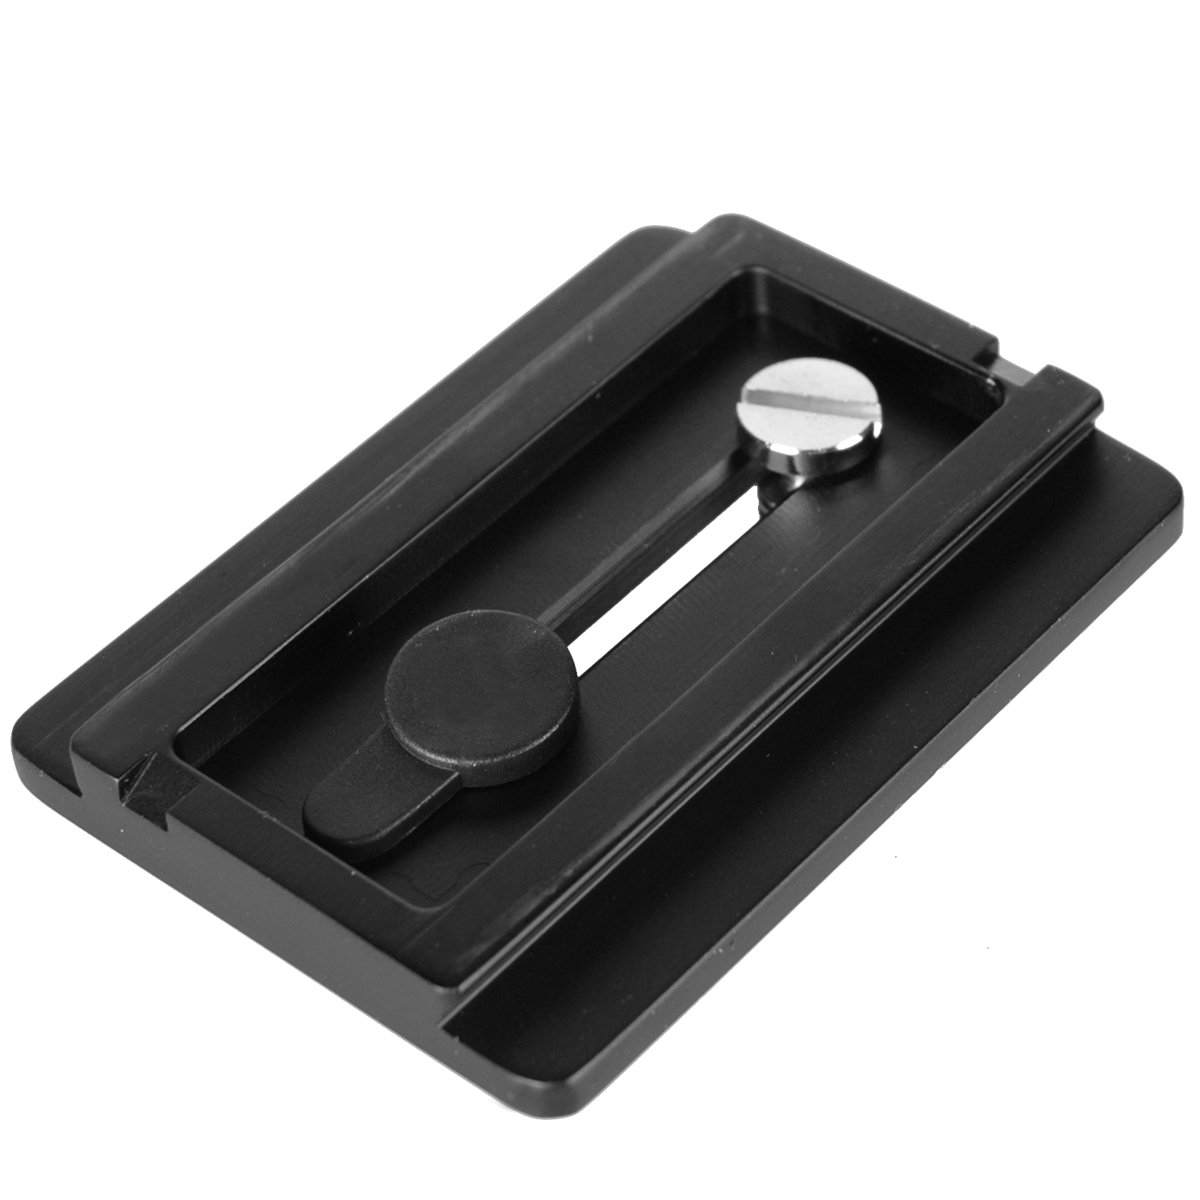 Walimex Quick-Release Plate for EI-717